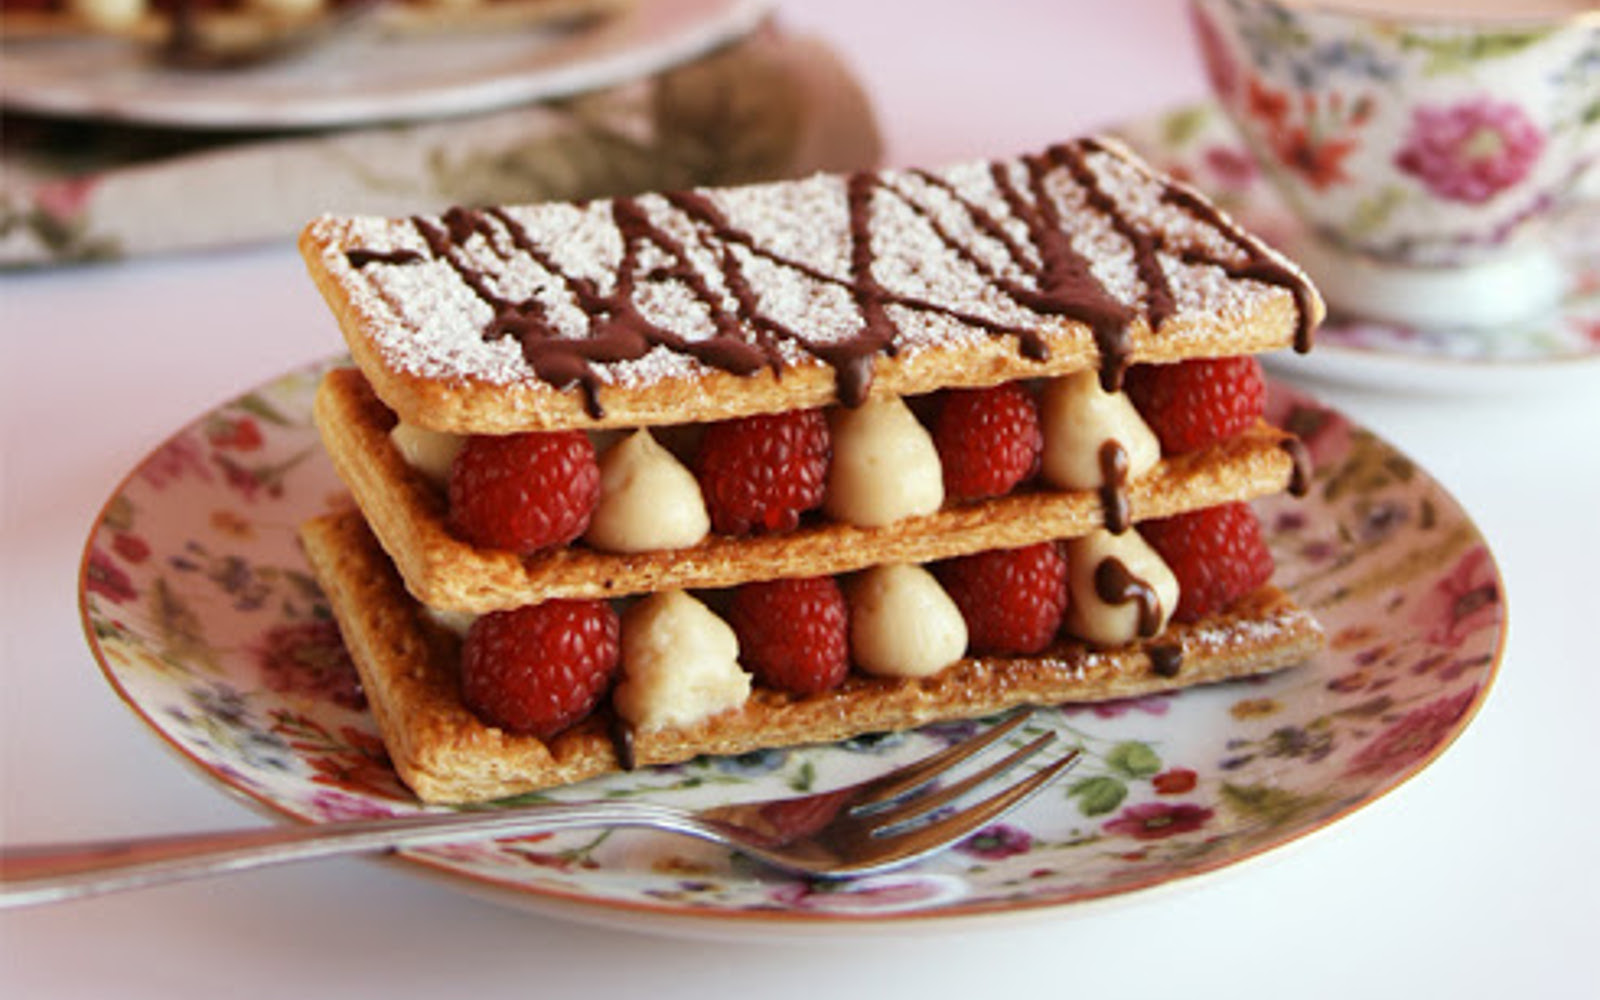 Raspberry Millefeuille With Lemon Pastry Cream